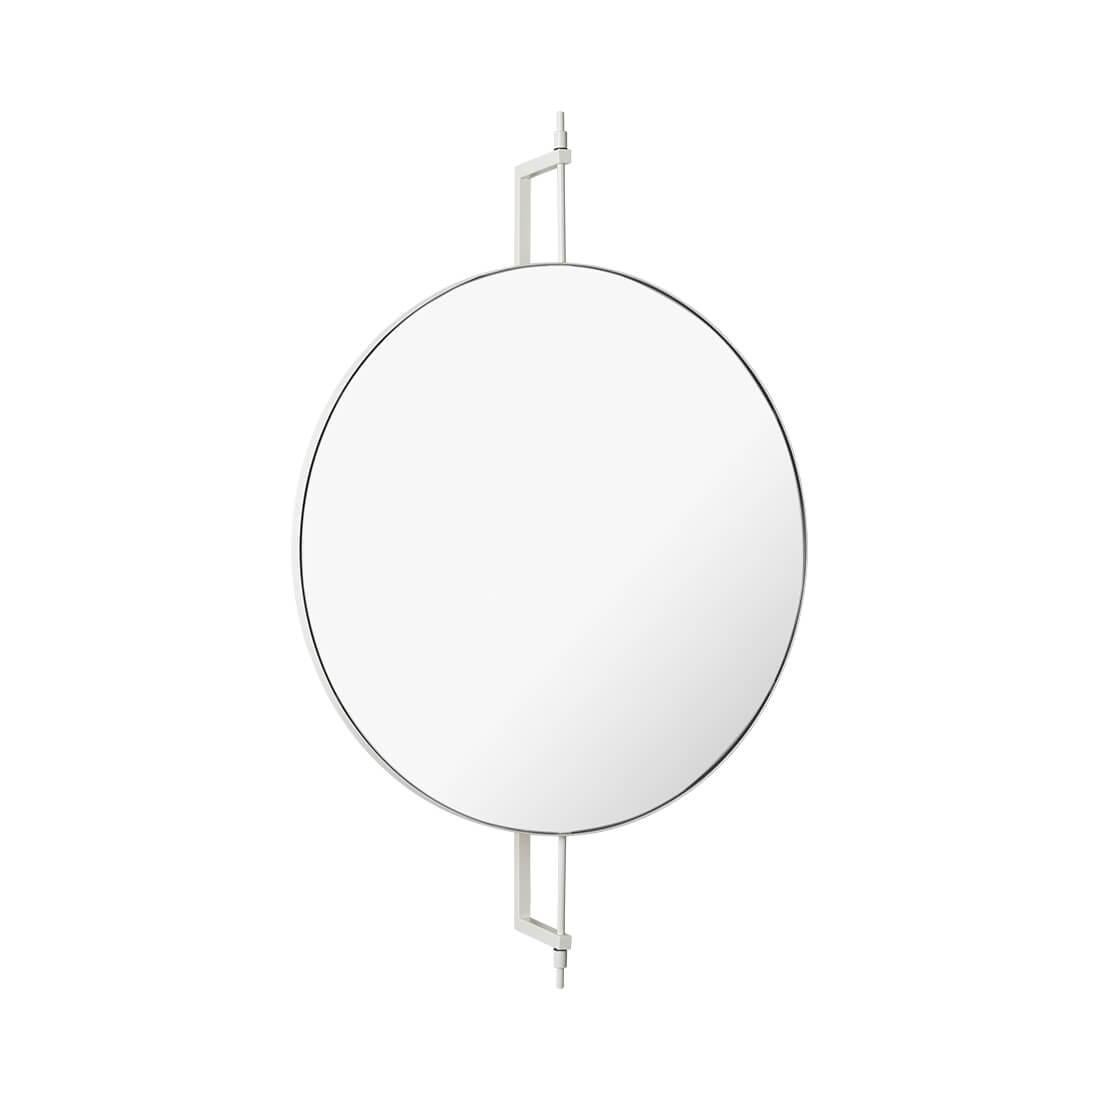 Circle rotating mirror by Kristina Dam Studio
Materials: Black powder-coated steel. Mirror.
Also available in other colors.
Dimensions: 13.5 x 60 x H 91cm.

The Modernist furniture collection takes notions of modern design and yet the